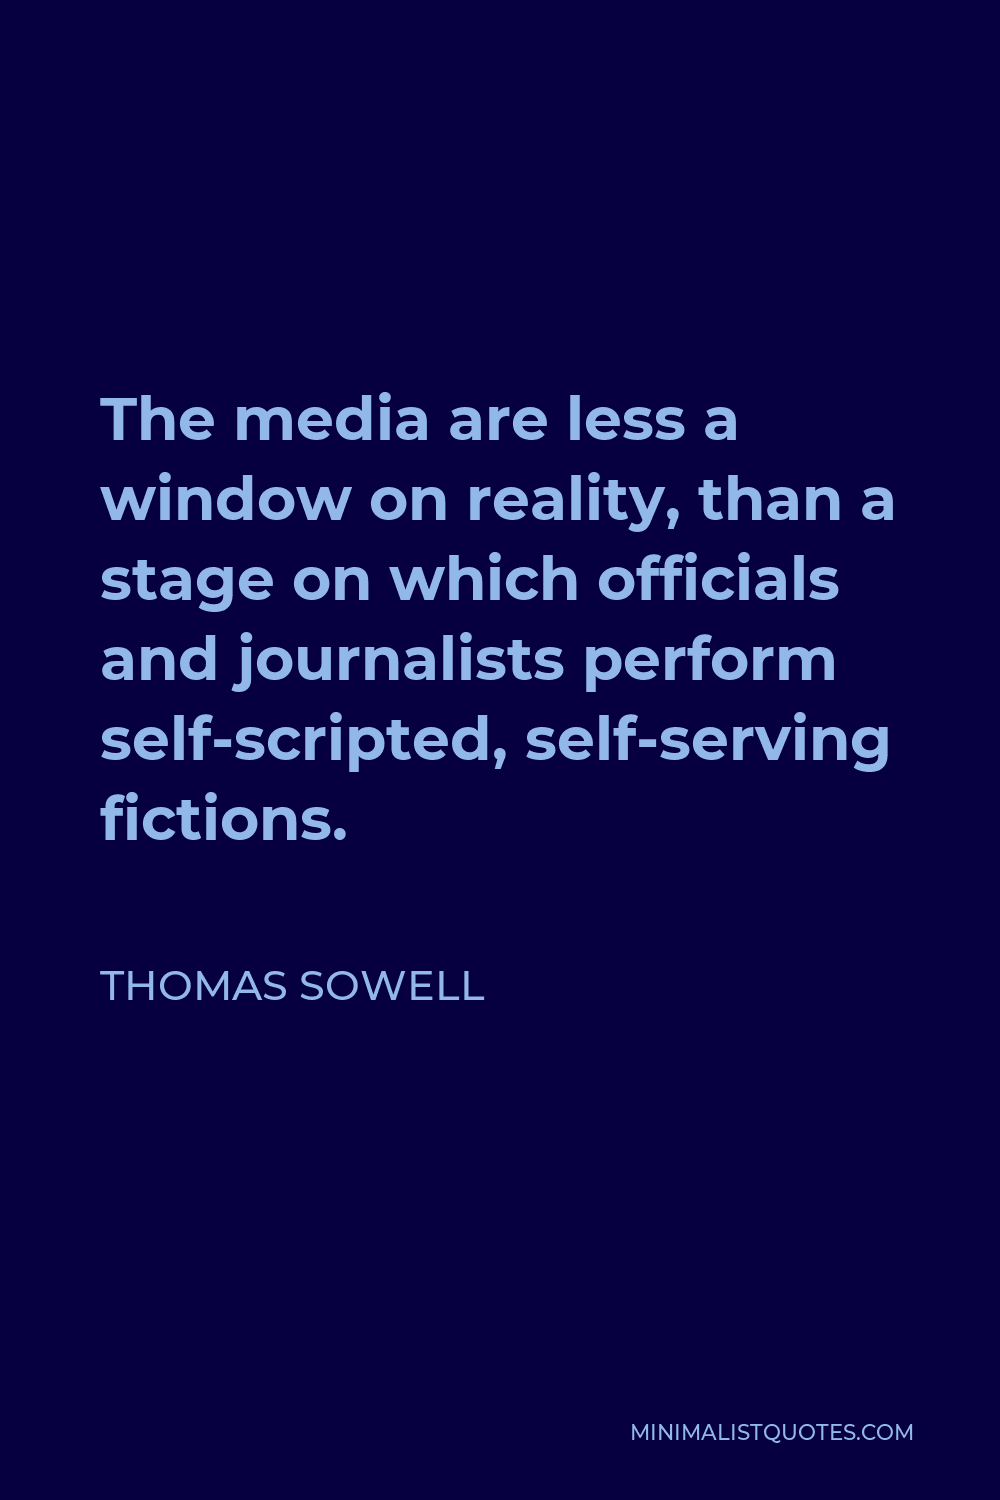 Thomas Sowell Quote - The media are less a window on reality, than a stage on which officials and journalists perform self-scripted, self-serving fictions.